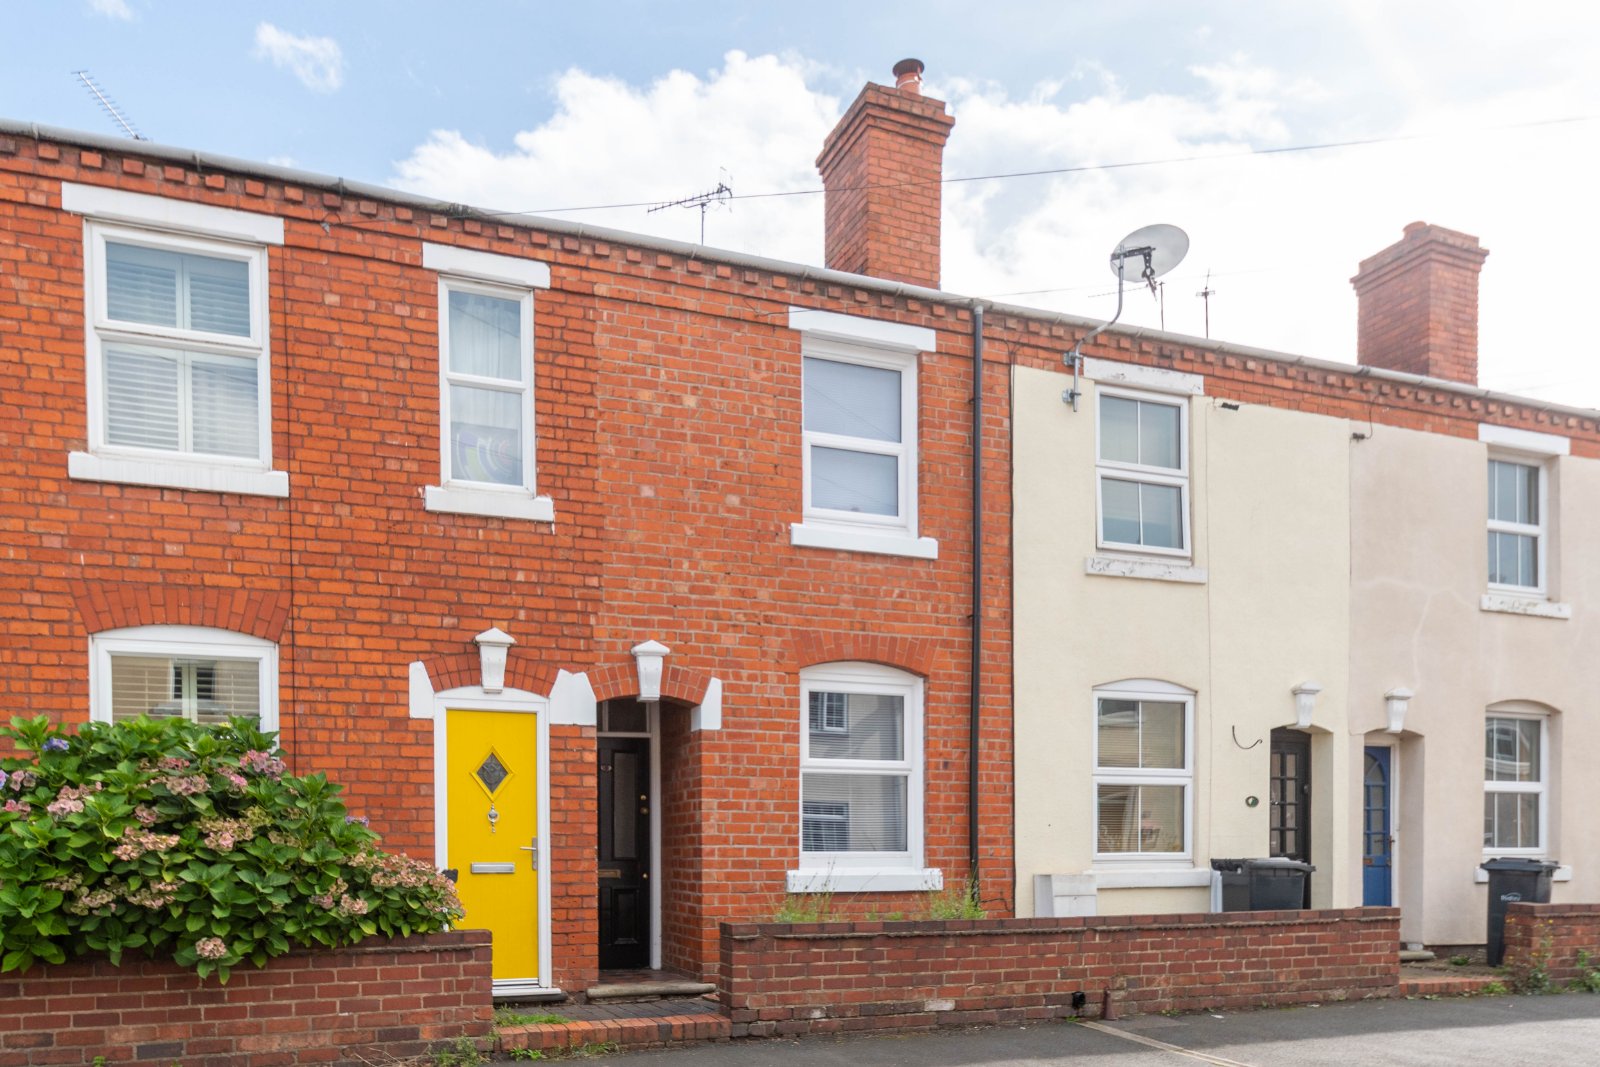 2 bed house for sale in Cecil Street, Stourbridge - Property Image 1